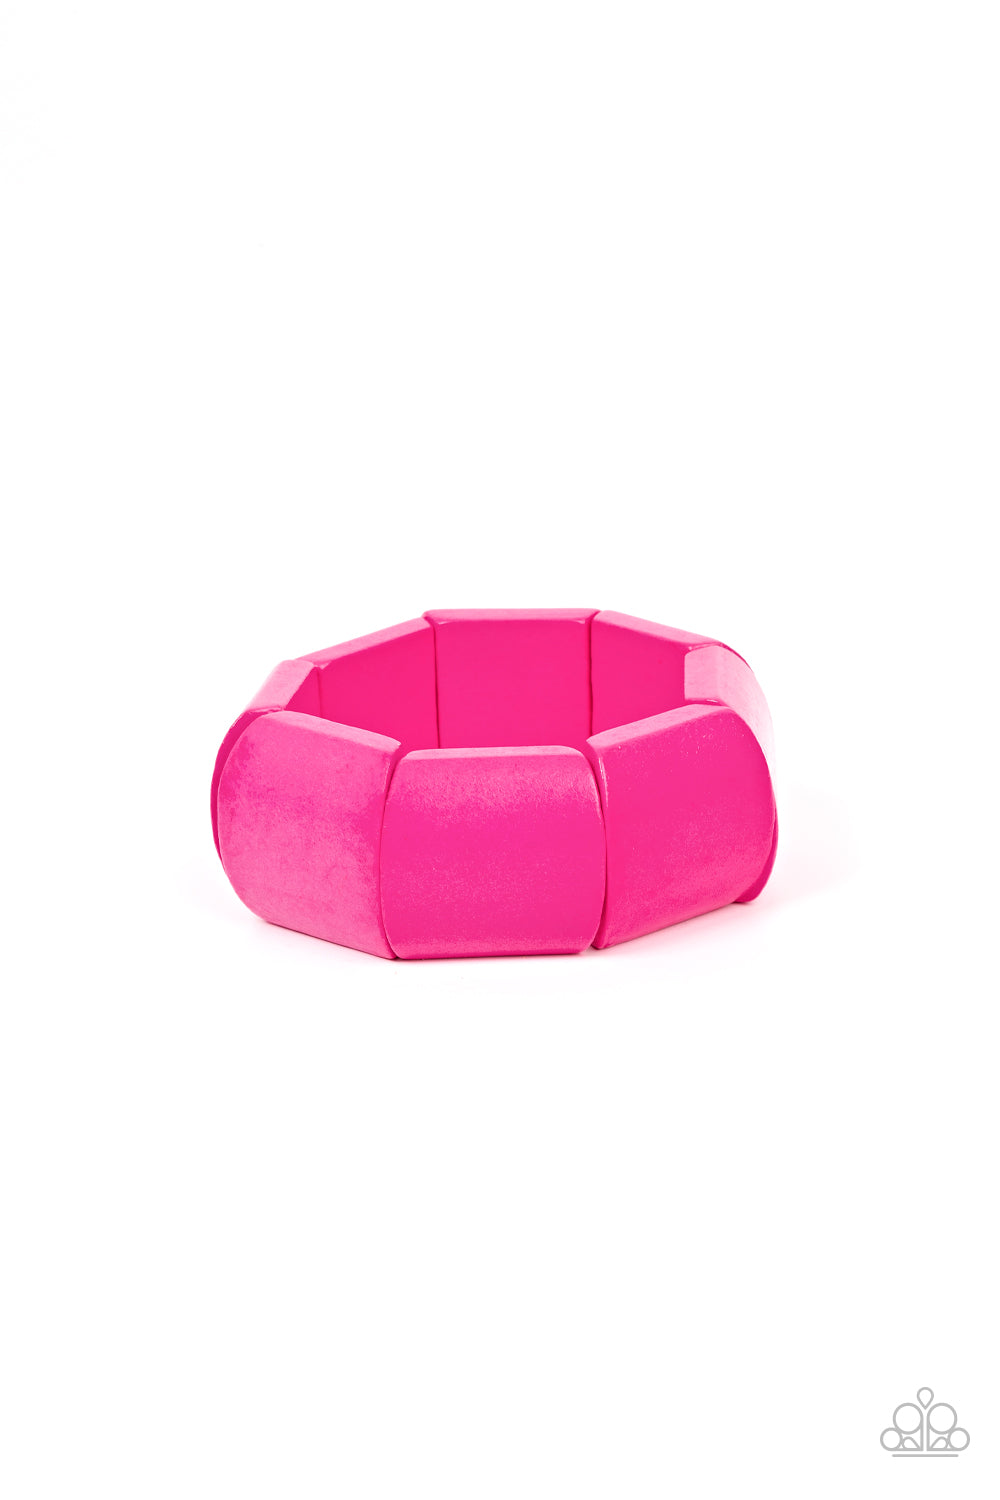 Coconut Cove Pink Wooden Bracelet - Paparazzi Accessories  Painted in a vivacious pink finish, chunky geometric wooden beads are threaded along stretchy bands around the wrist for a colorful tropical inspired look.  Sold as one individual bracelet.  P9SE-PKXX-145XX